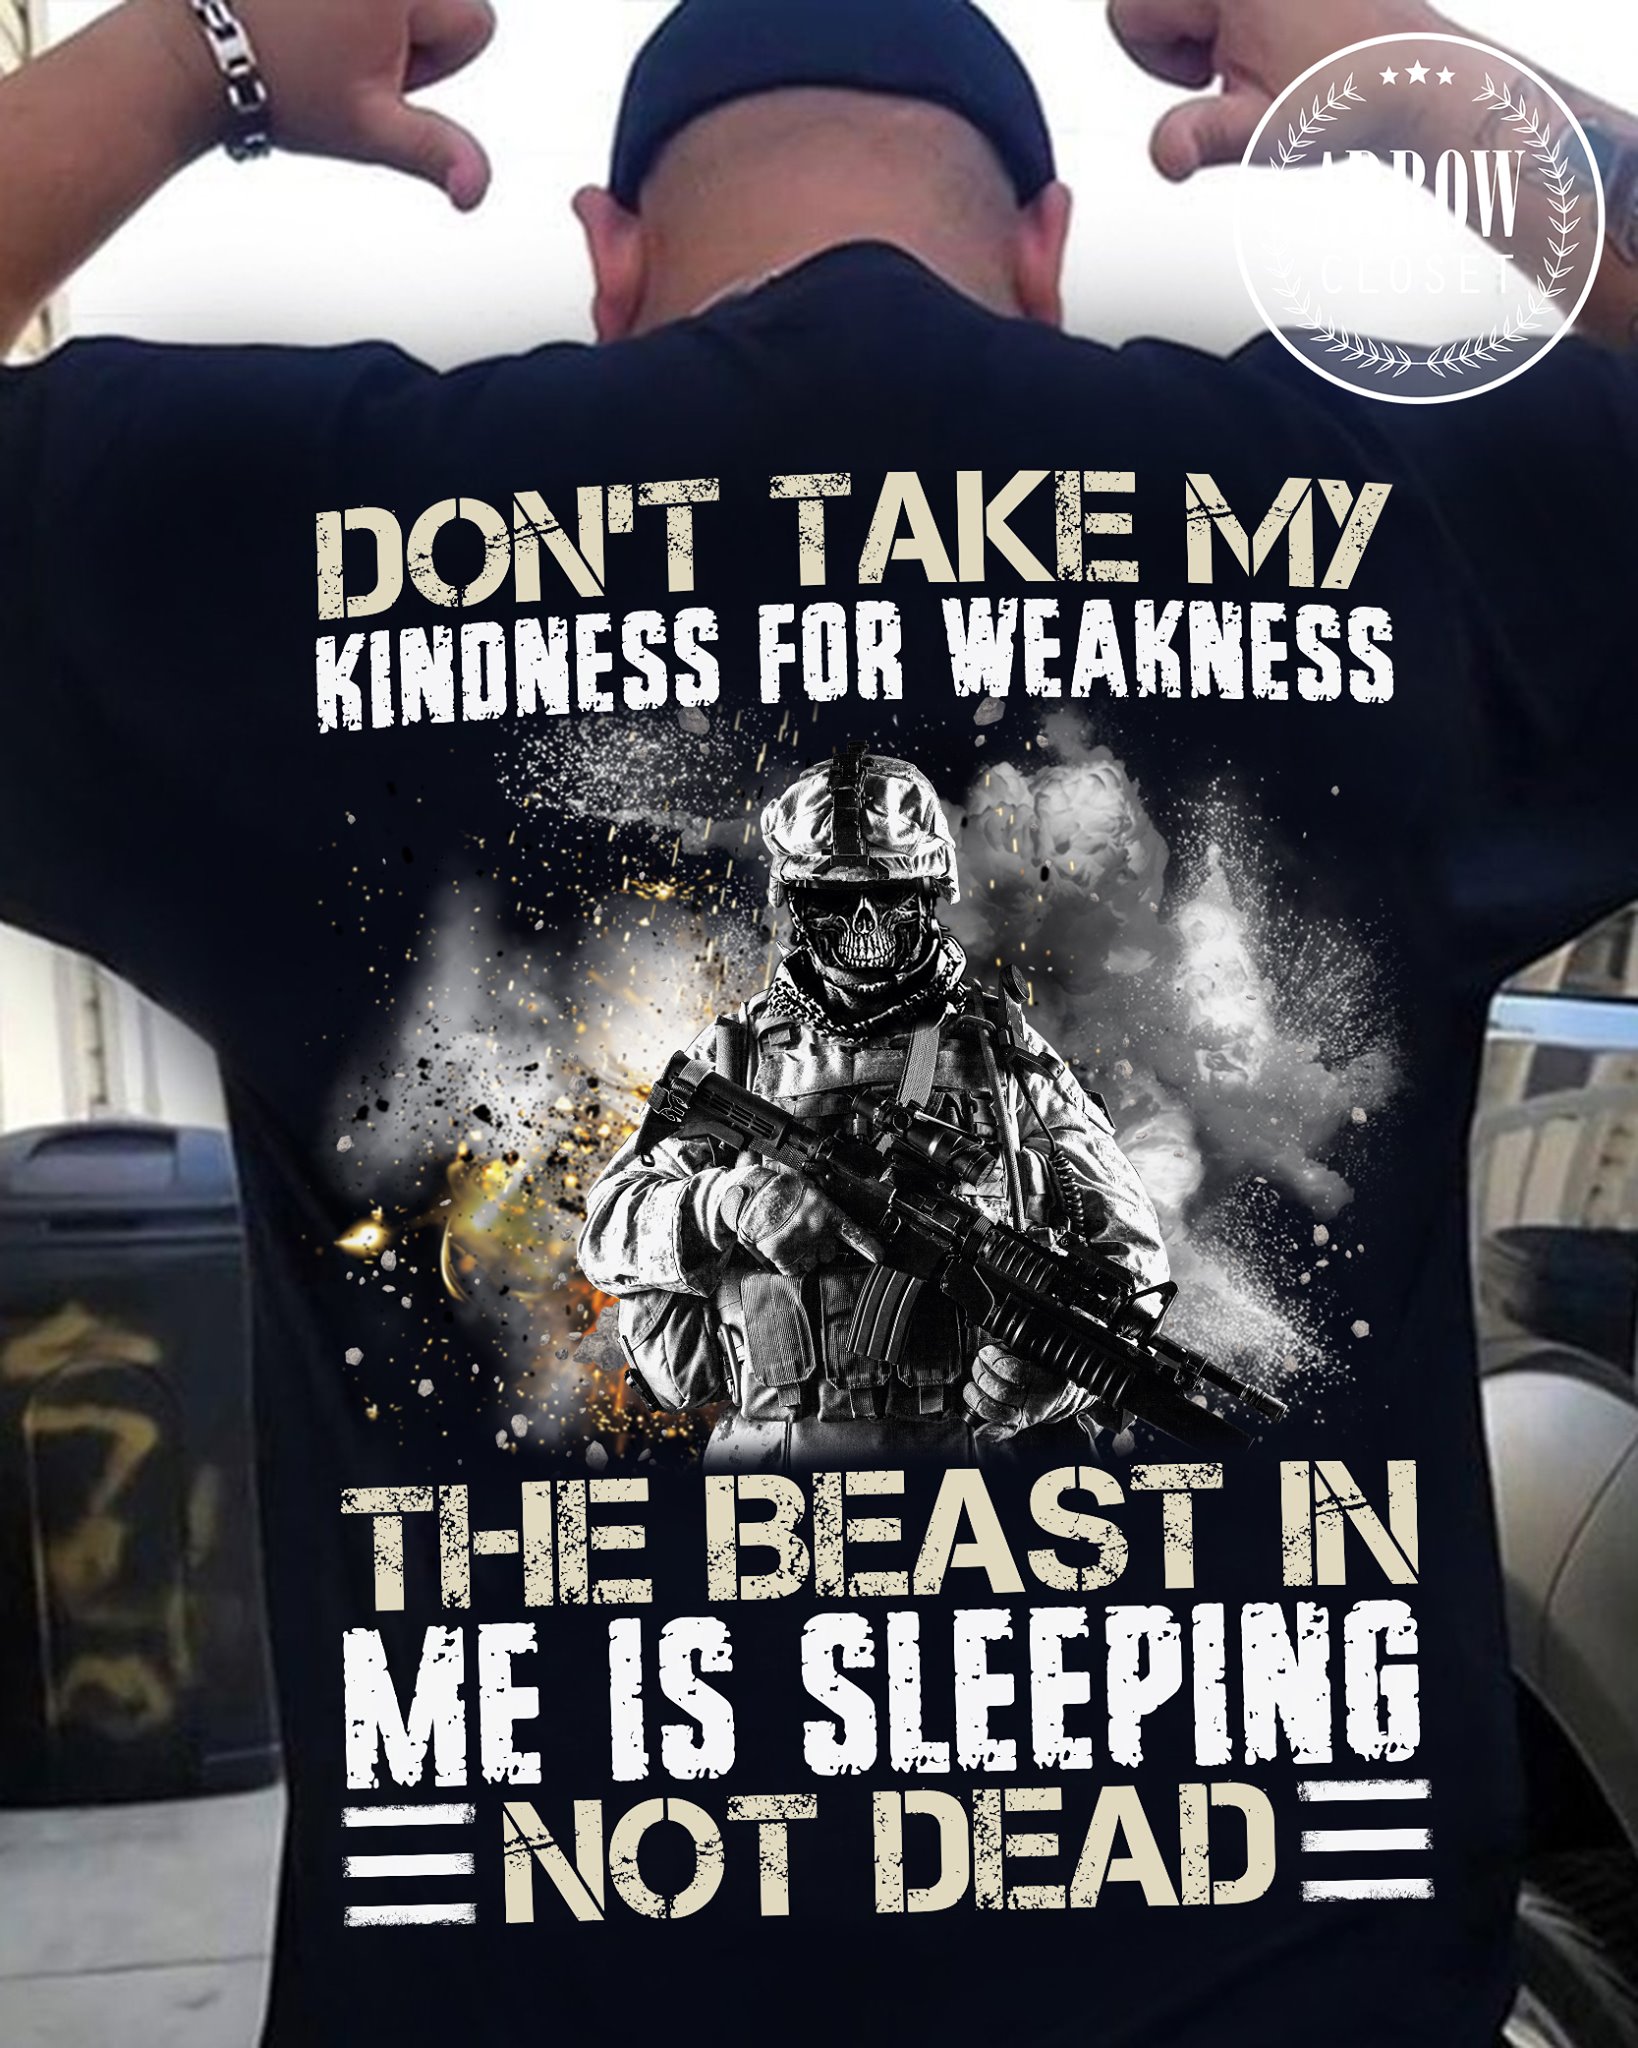 Don't take my kindness for weakness the beast in me is sleep not dead - Skullcap